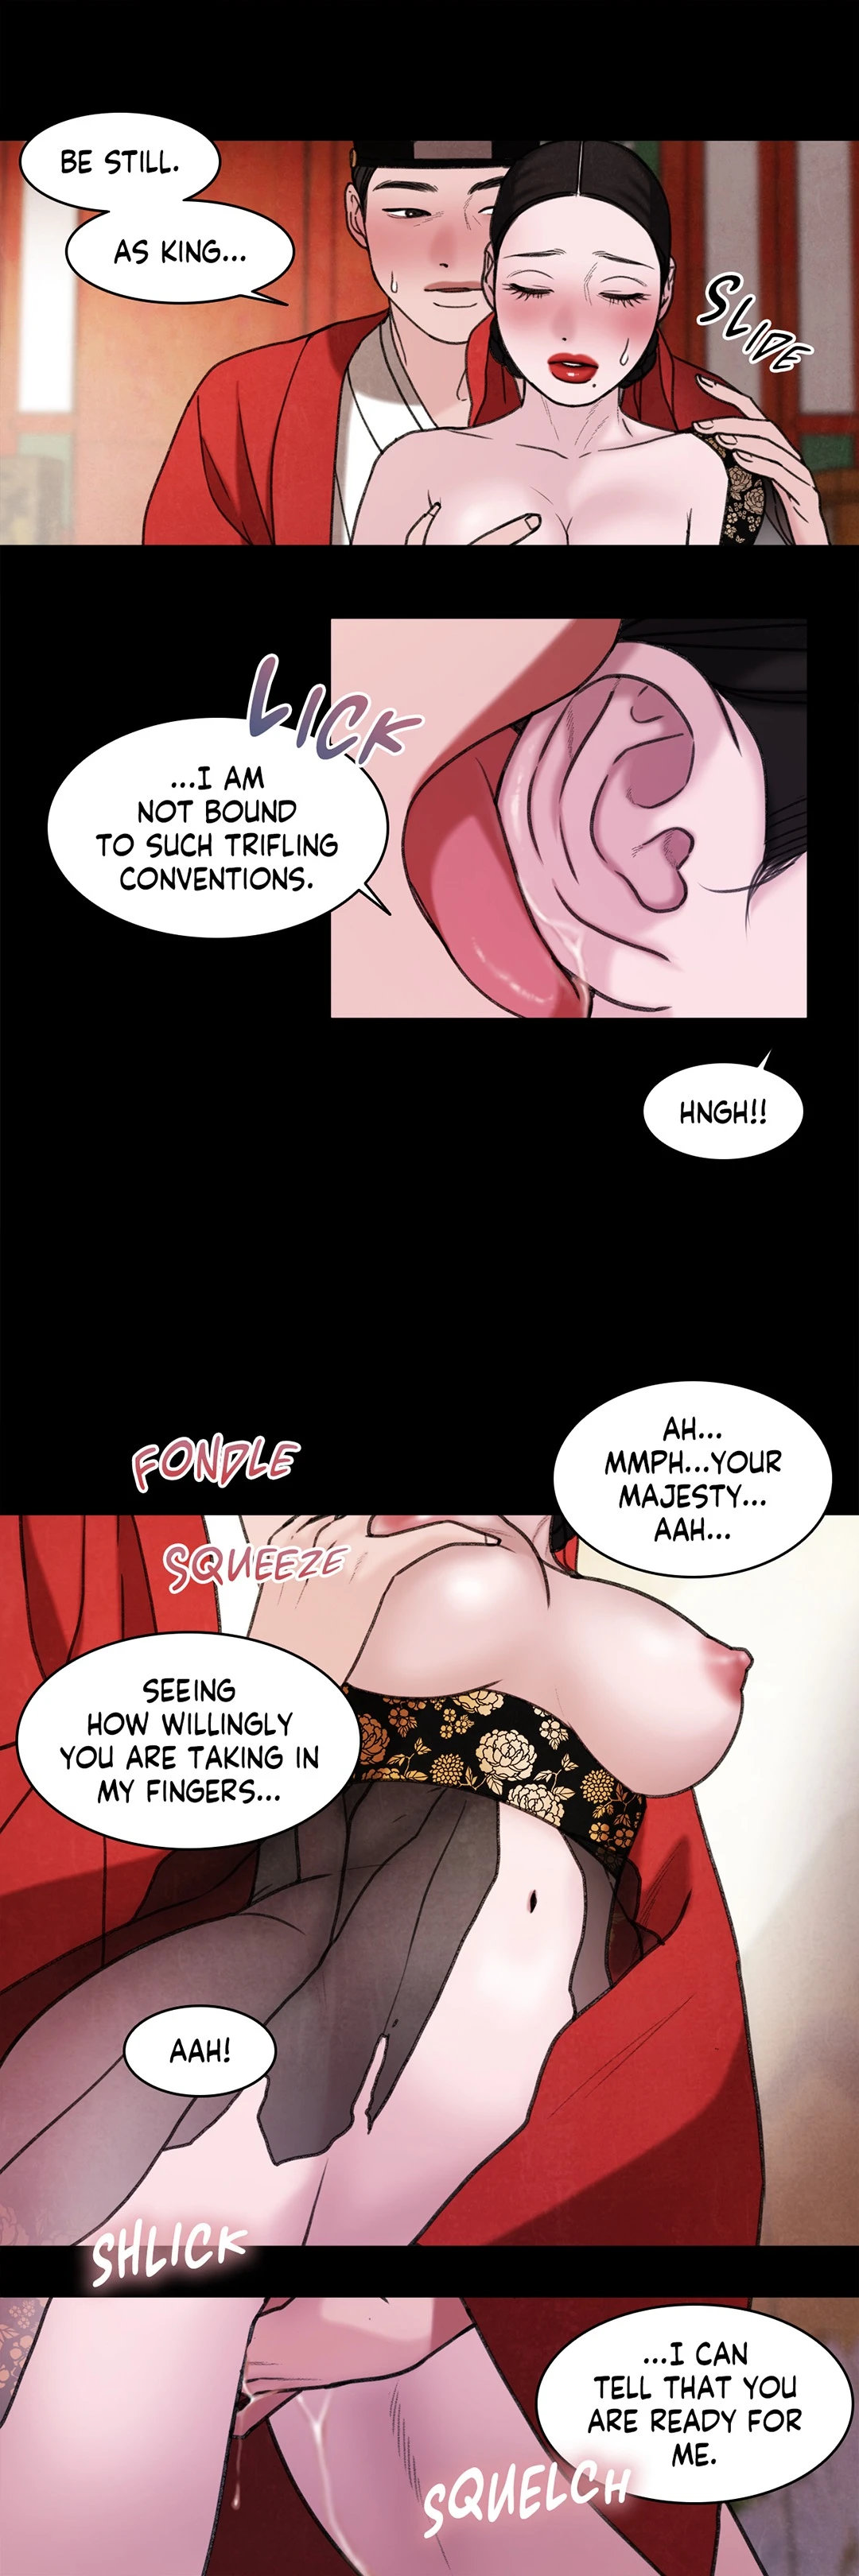 Dirty Reverie - Chapter 38 Page 6